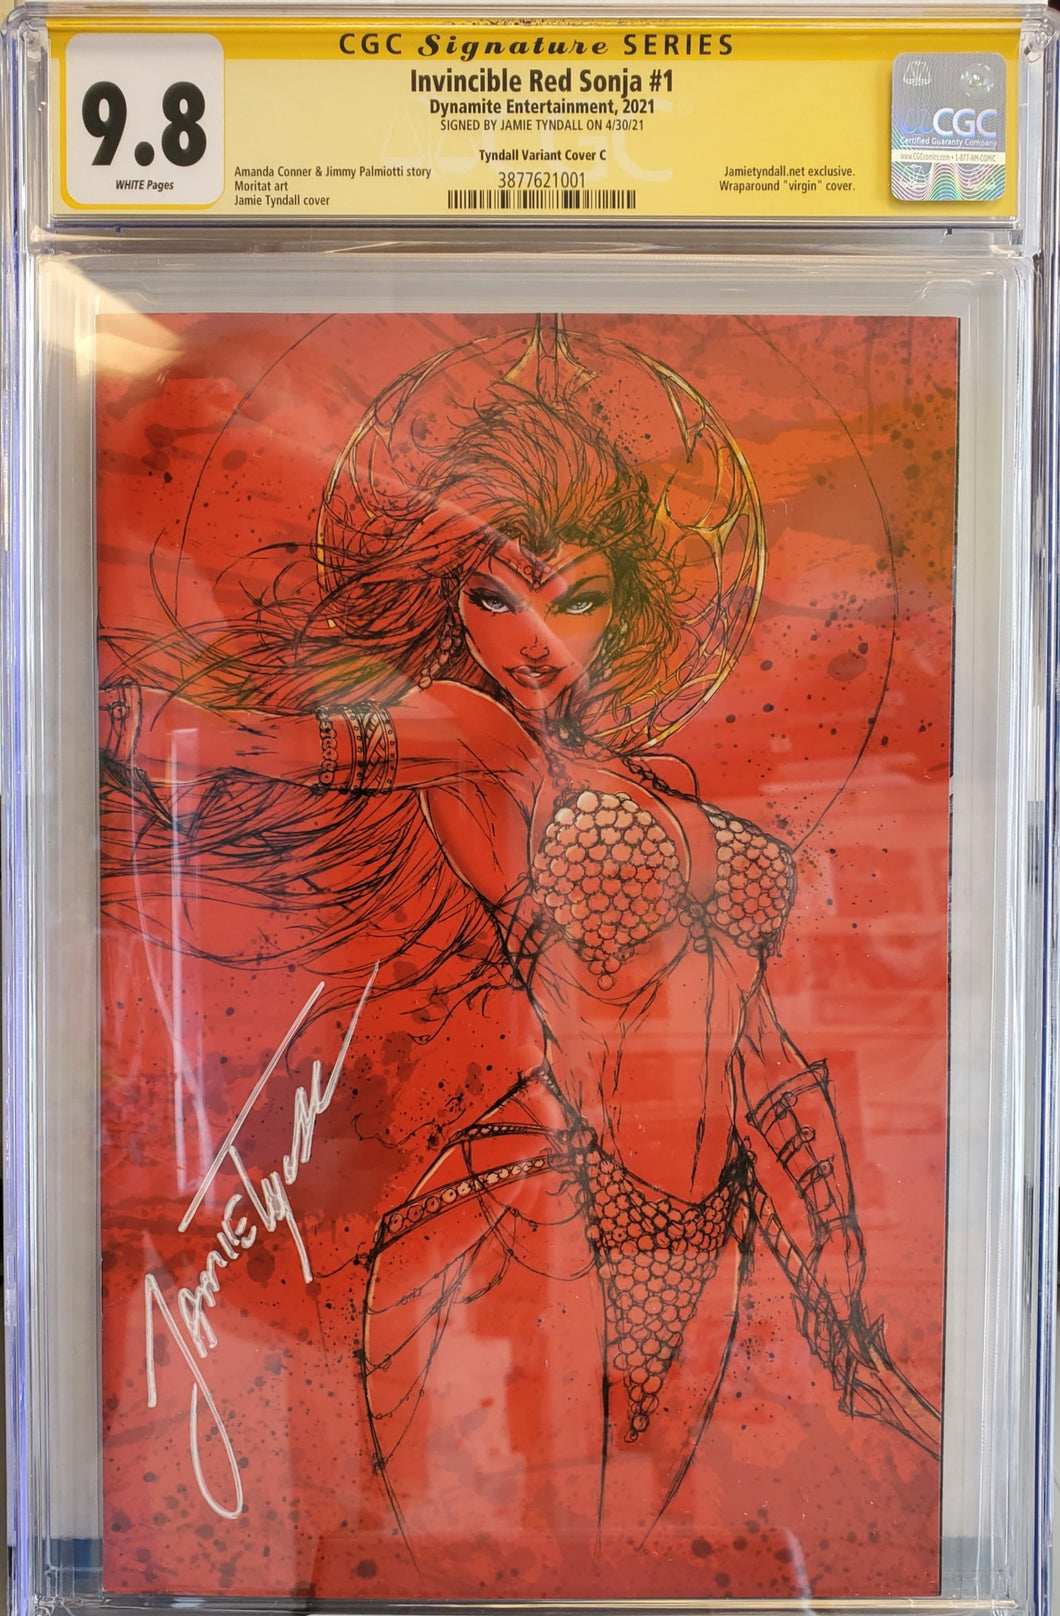 Invincible Red Sonja #1 - CGC 9.8 Signed Tyndall wraparound cover